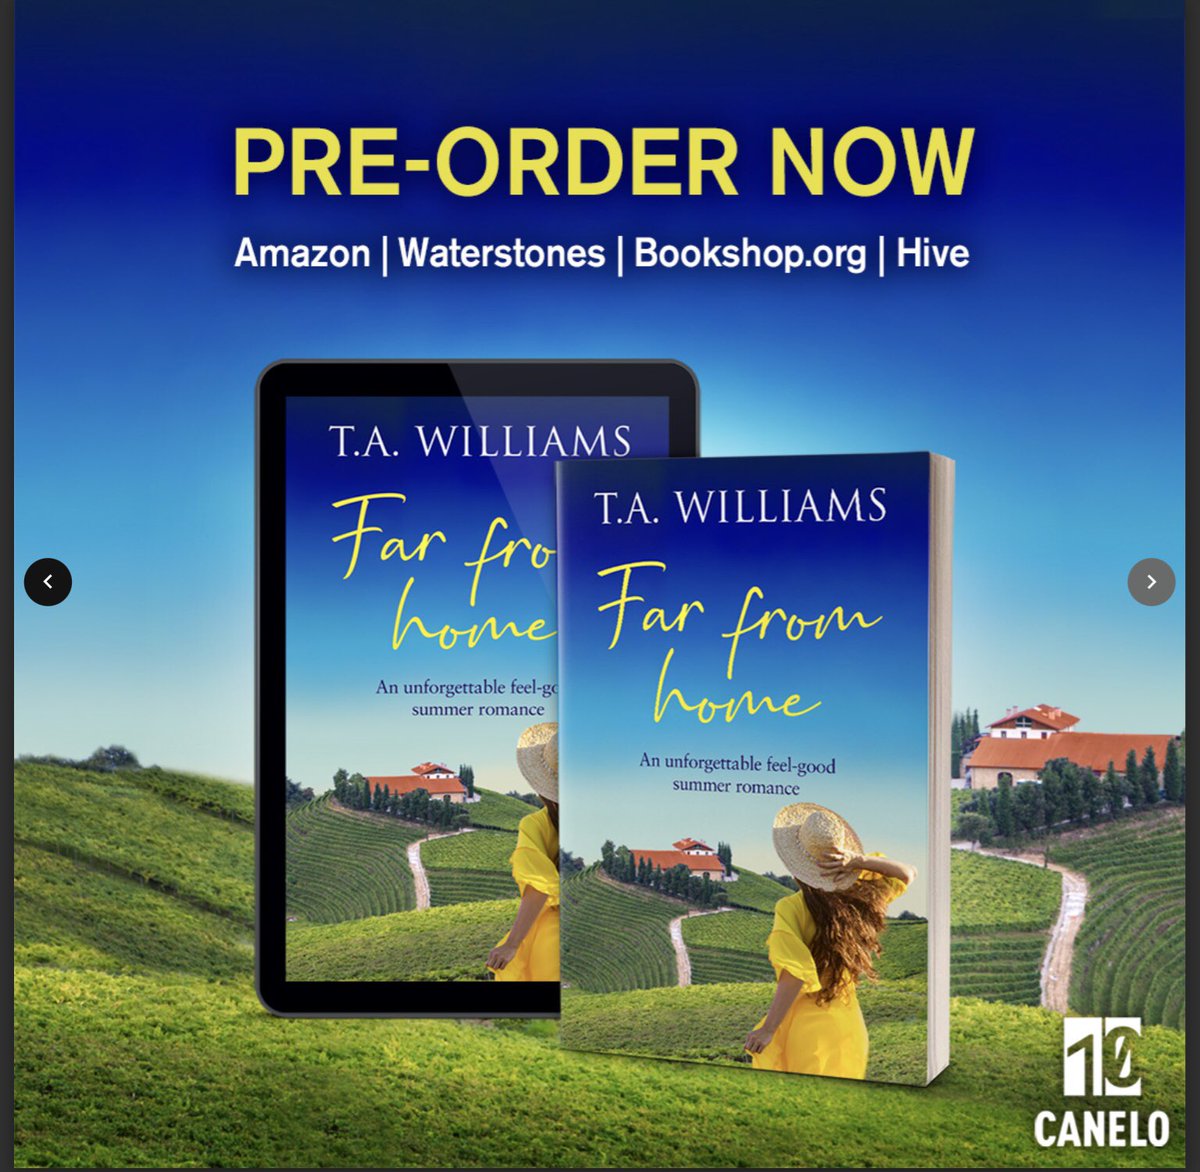 Only one week to wait! Another one of my #romancebooks @canelo_co Amy discovers a sleepy village in Tuscany, an unexpected legacy, and finds herself reassessing her whole life. A romance in the Italian sunshine - black Labrador guaranteed. mybook.to/WilliamsFarFro…